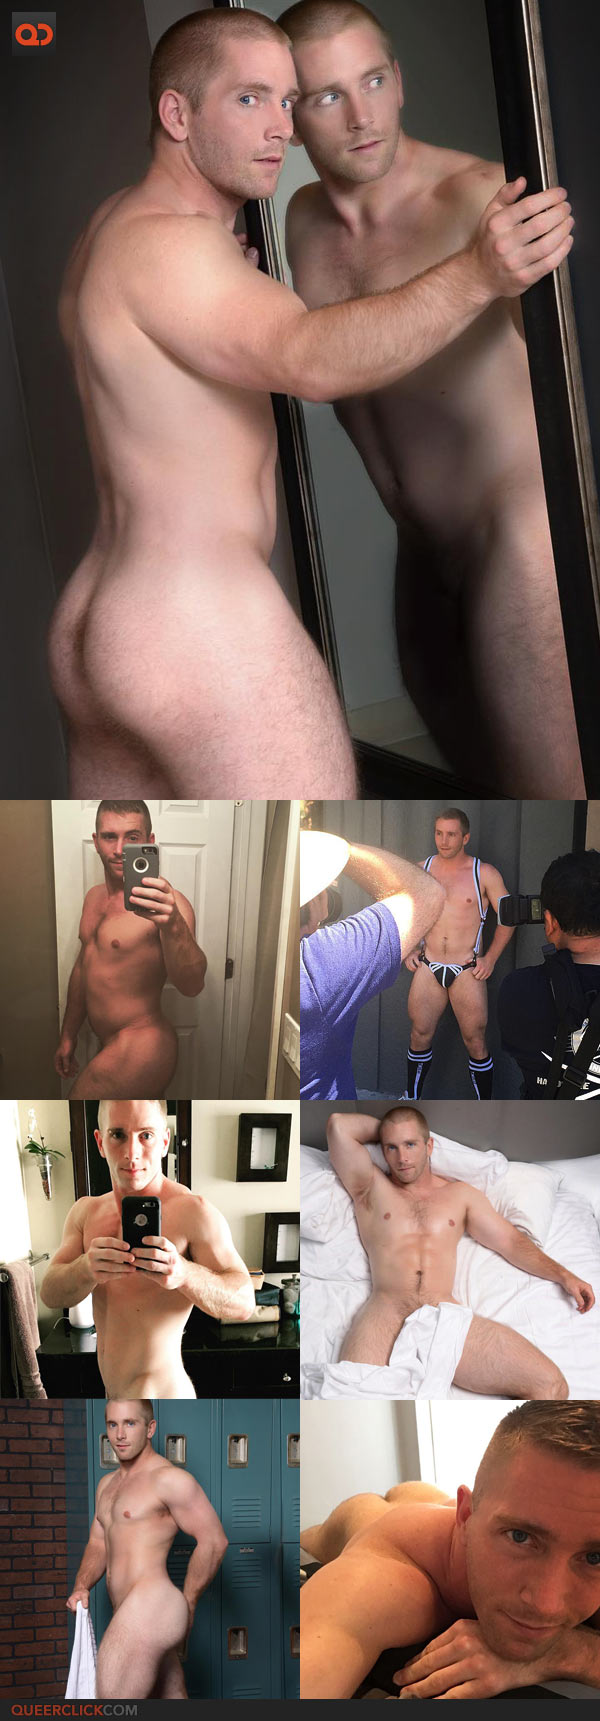 Ten Best Muscle Butts From Instagram You Need To Follow Right Now!